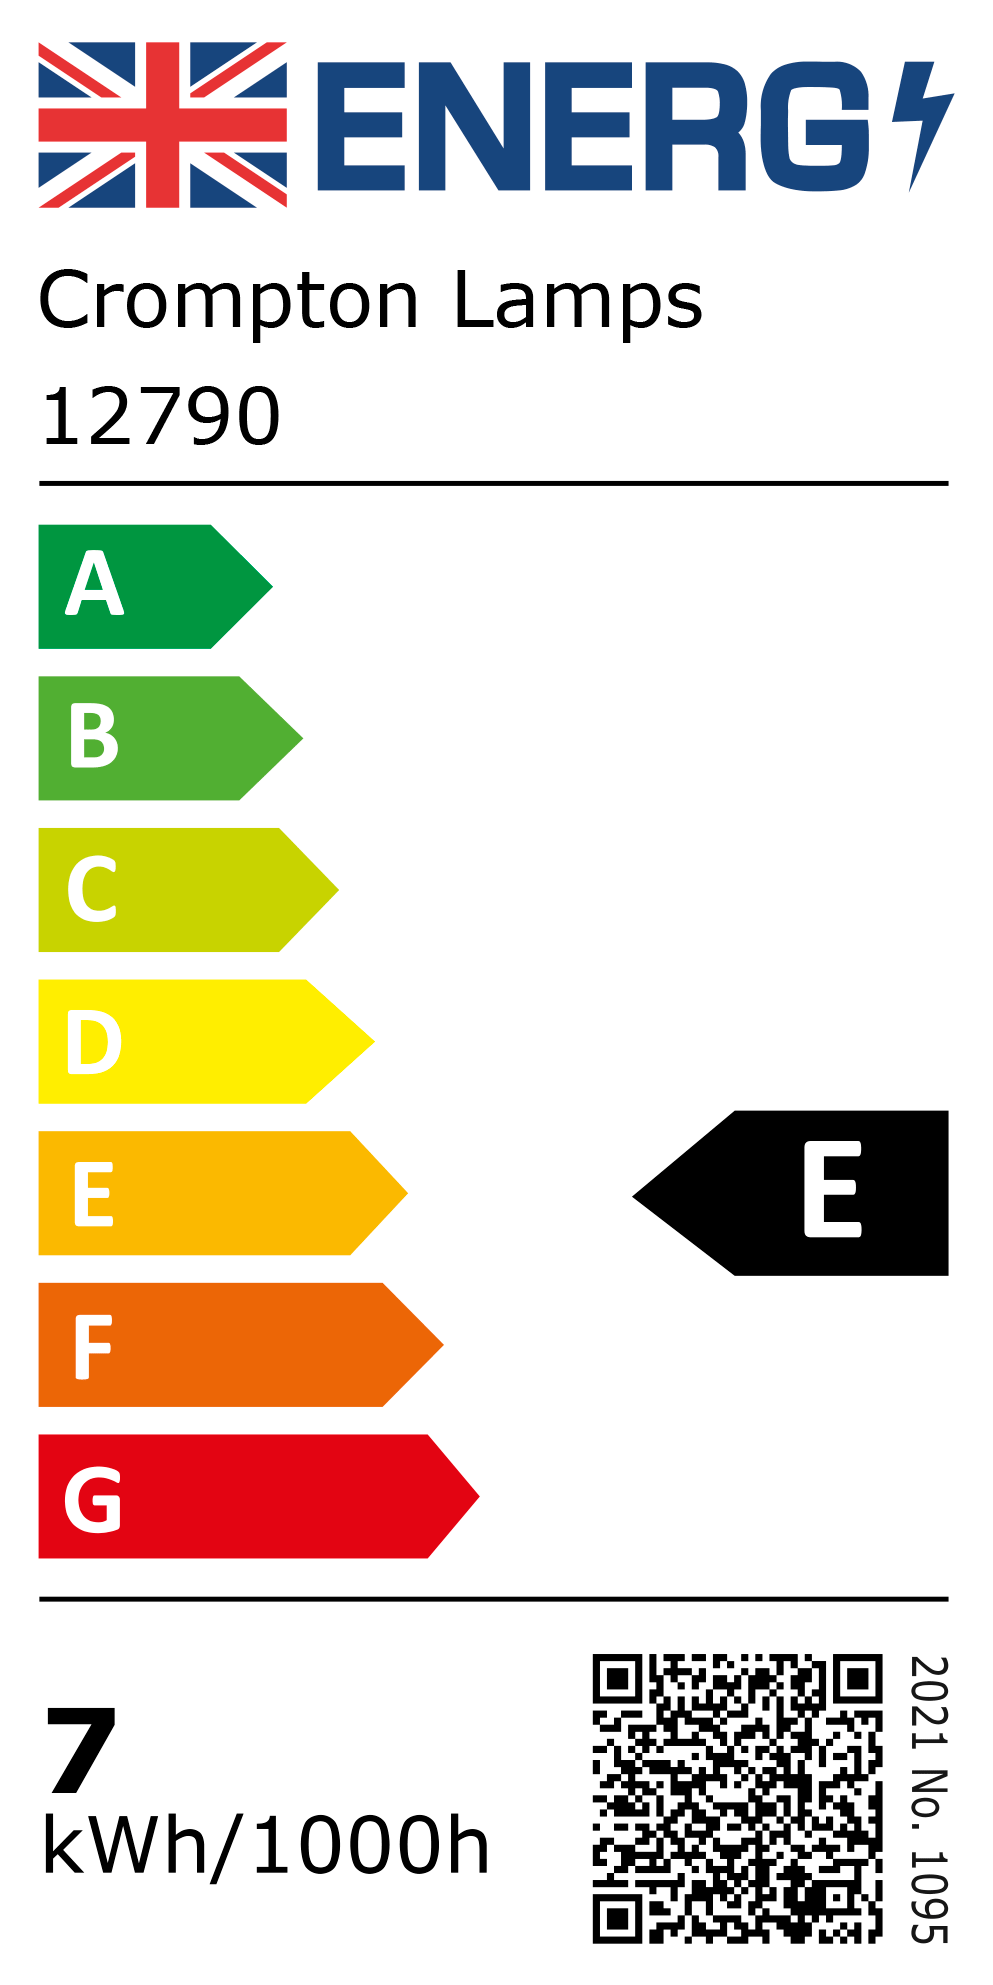 New 2021 Energy Rating Label: MPN 12790